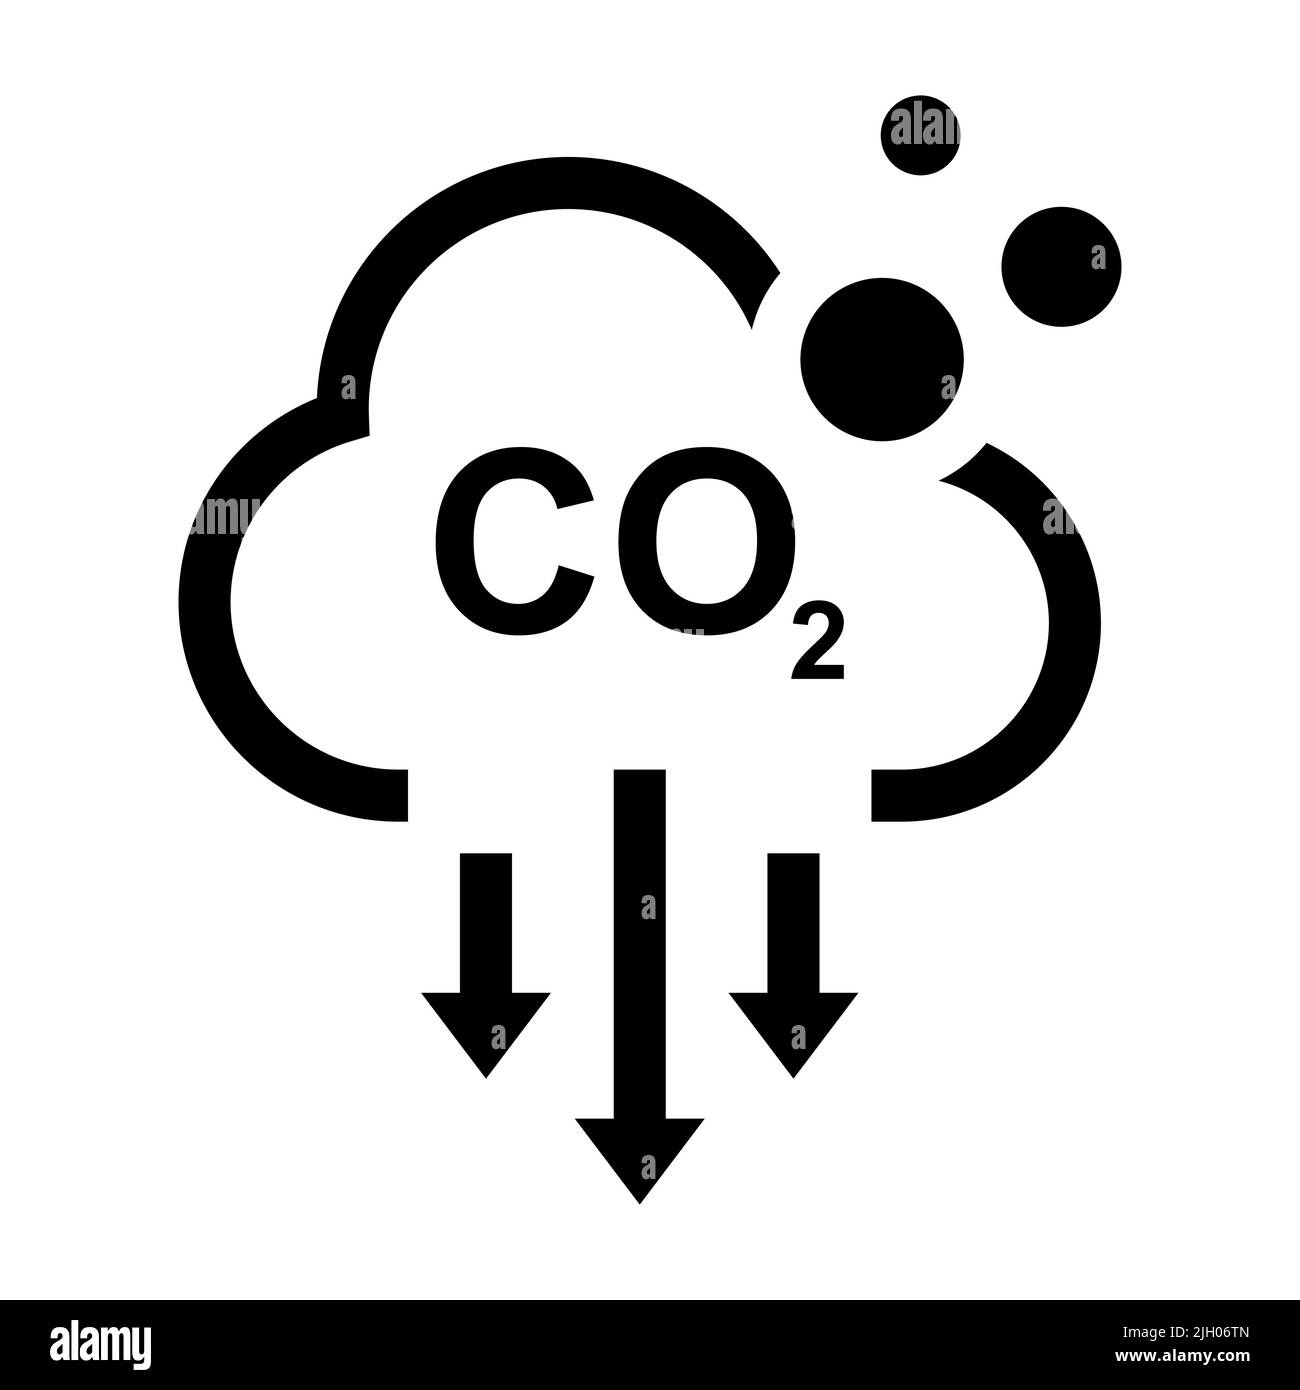 Carbon dioxide or CO2 vector icon on white background Stock Vector